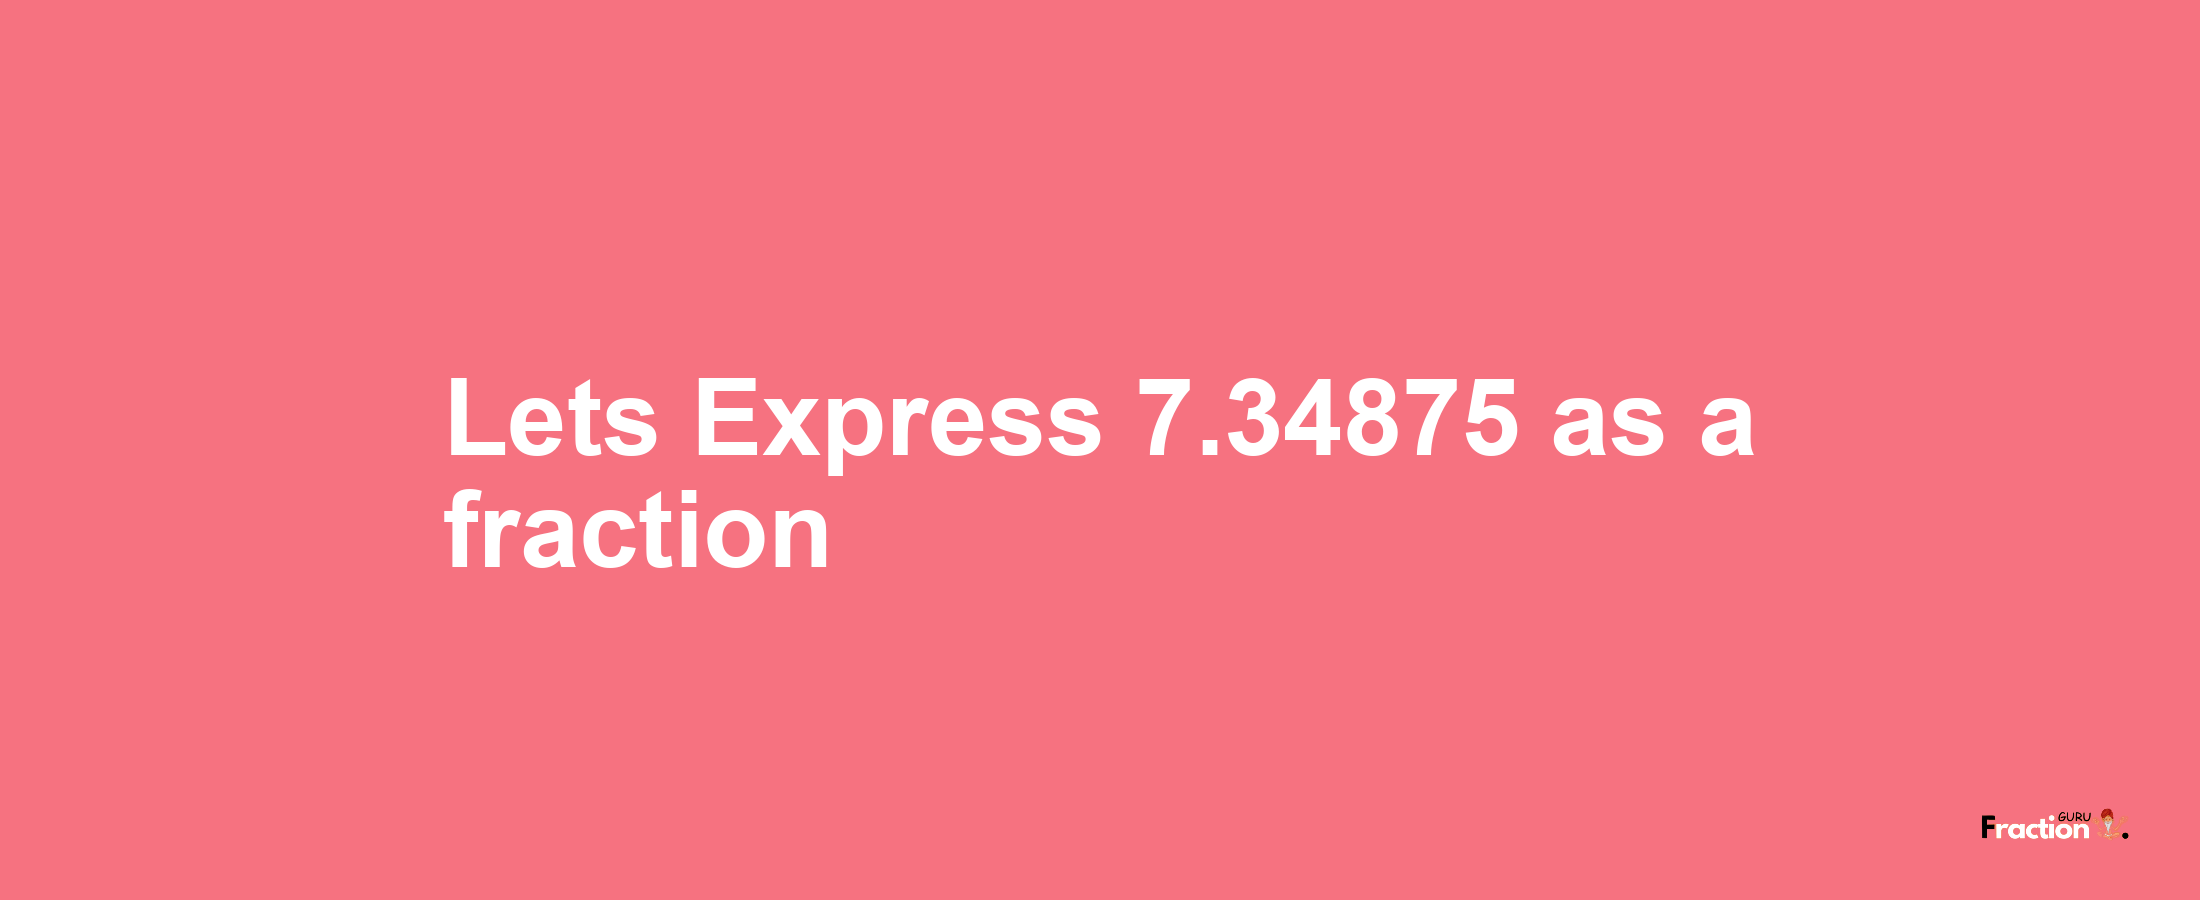 Lets Express 7.34875 as afraction